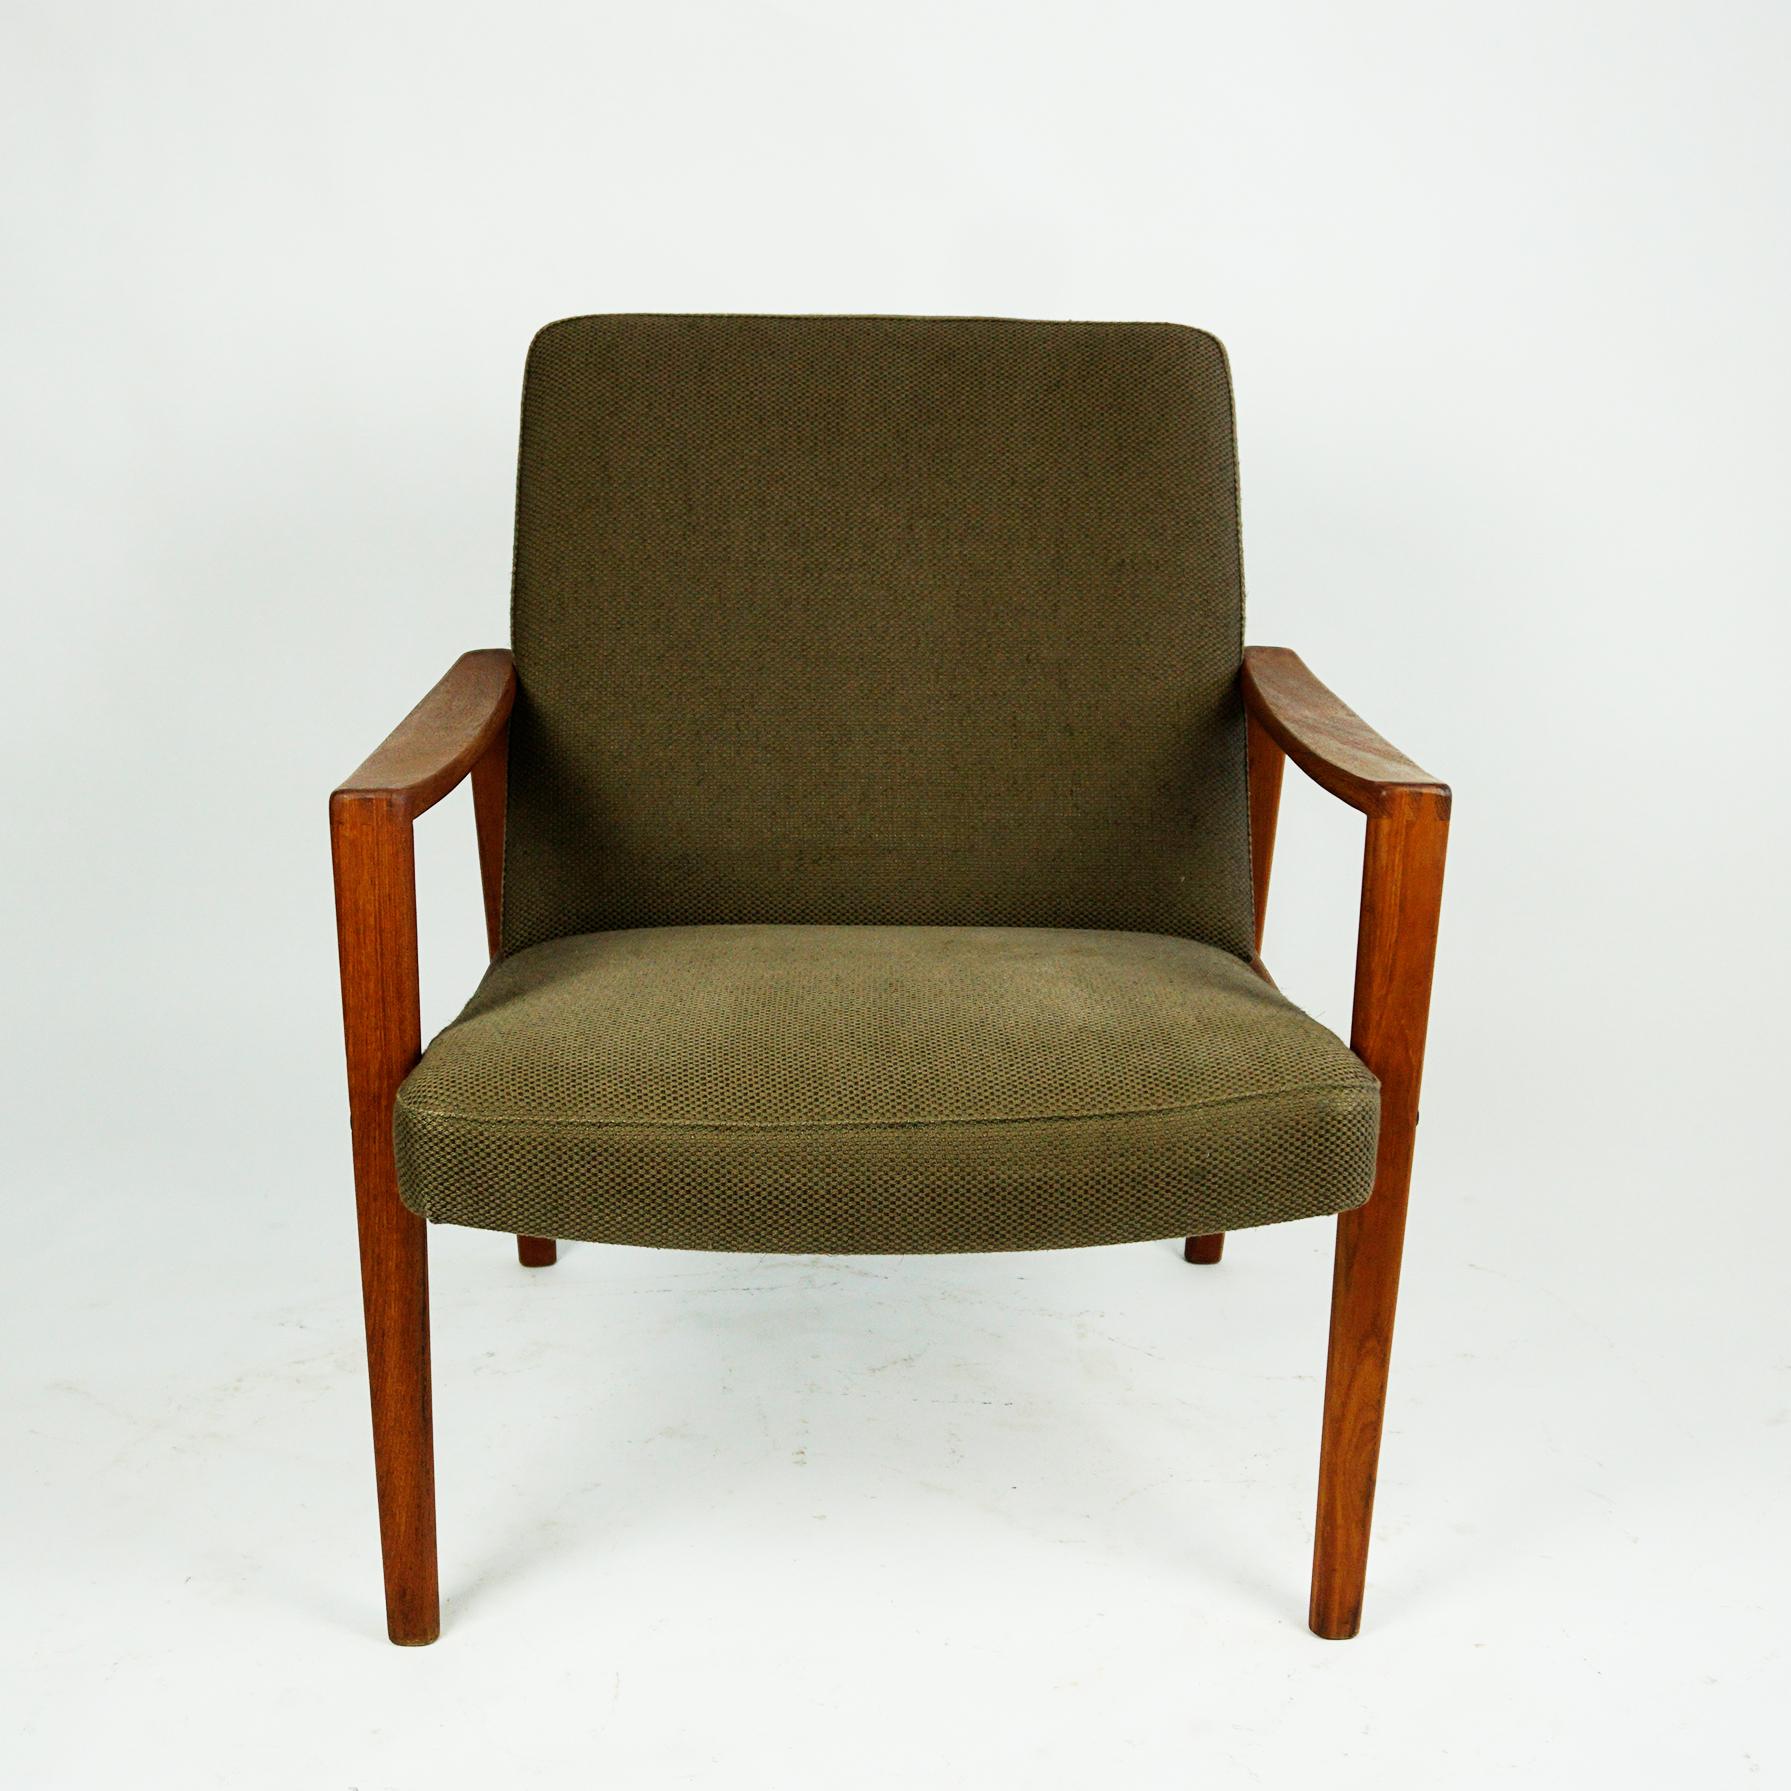 Comfortable 1960s Scandinavian teak easy chair in very good condition with original khaki green fabric and beautiful handcrafted details.
There is one more matching easy chair and a matching sofa available. 
Very comfortable lounge chair and